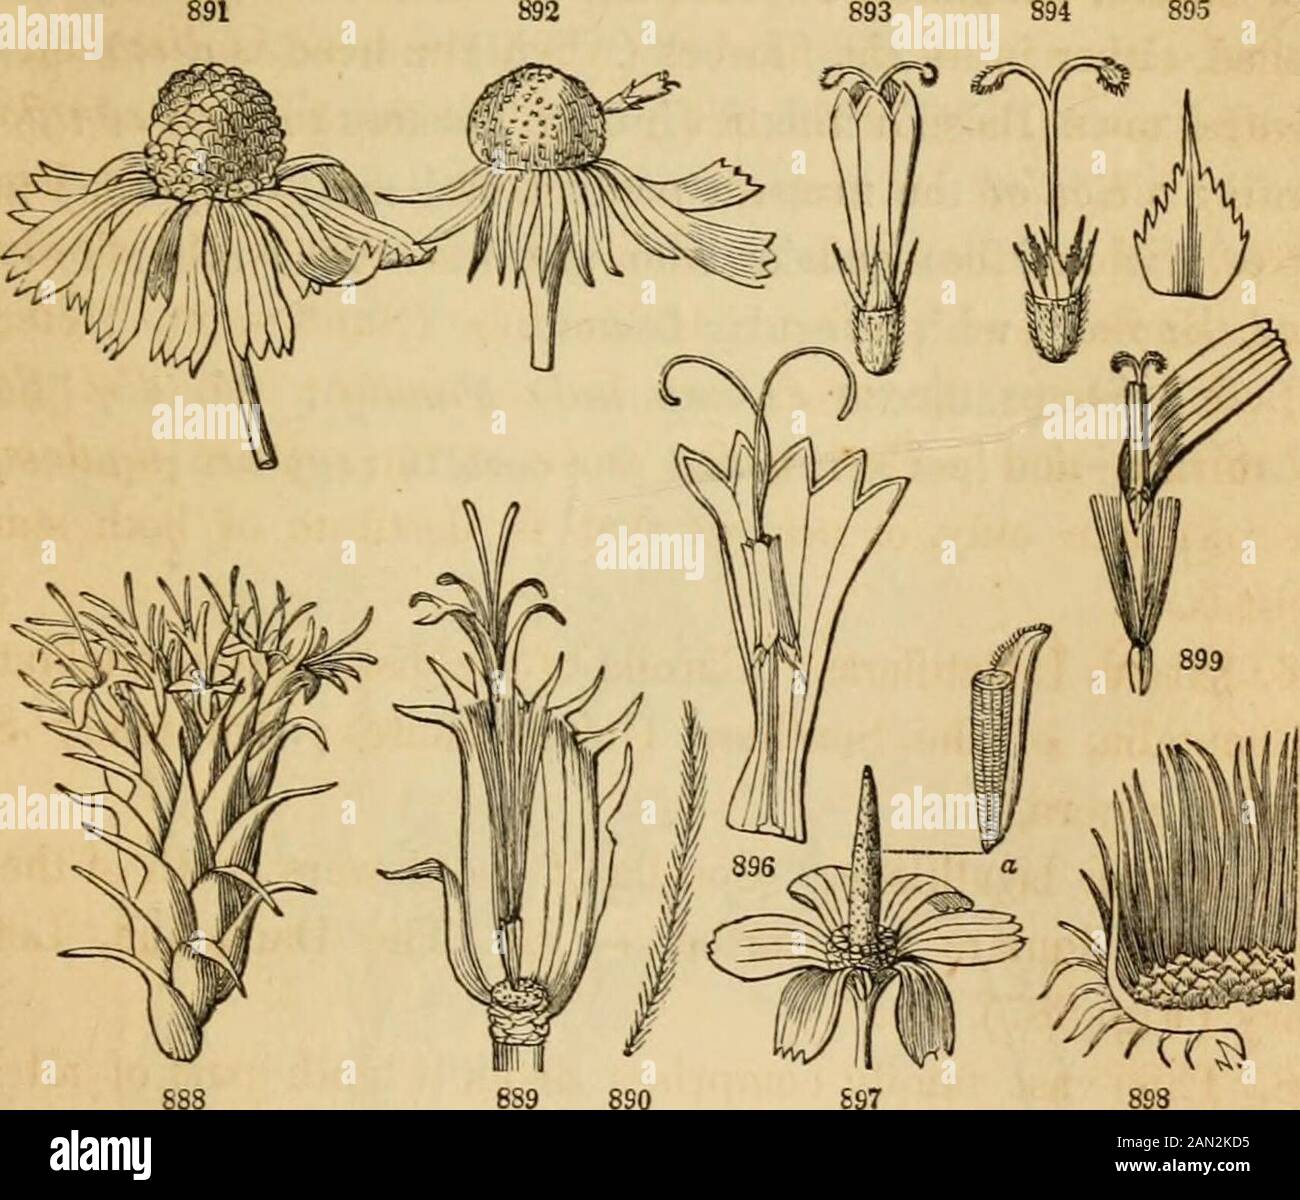 Introduction to structural and systematic botany, and vegetable physiology, : being a 5th and revedof the Botanical text-book, illustrated with over thirteen hundred woodcuts . re among the reputed remedies for the bitesof serpents; so are some species of Mikania in Central America.The juice of Silphium and of some Sunflowers is resinous. Theleaves of Solidago odora, which owe their pleasant anisate fragranceto a peculiar volatile oil, are infused as a substitute for tea. Fromthe seeds of Sunflower, and several other plants of the order, a blandoil is expressed. The tubers of Helianthus tubero Stock Photo